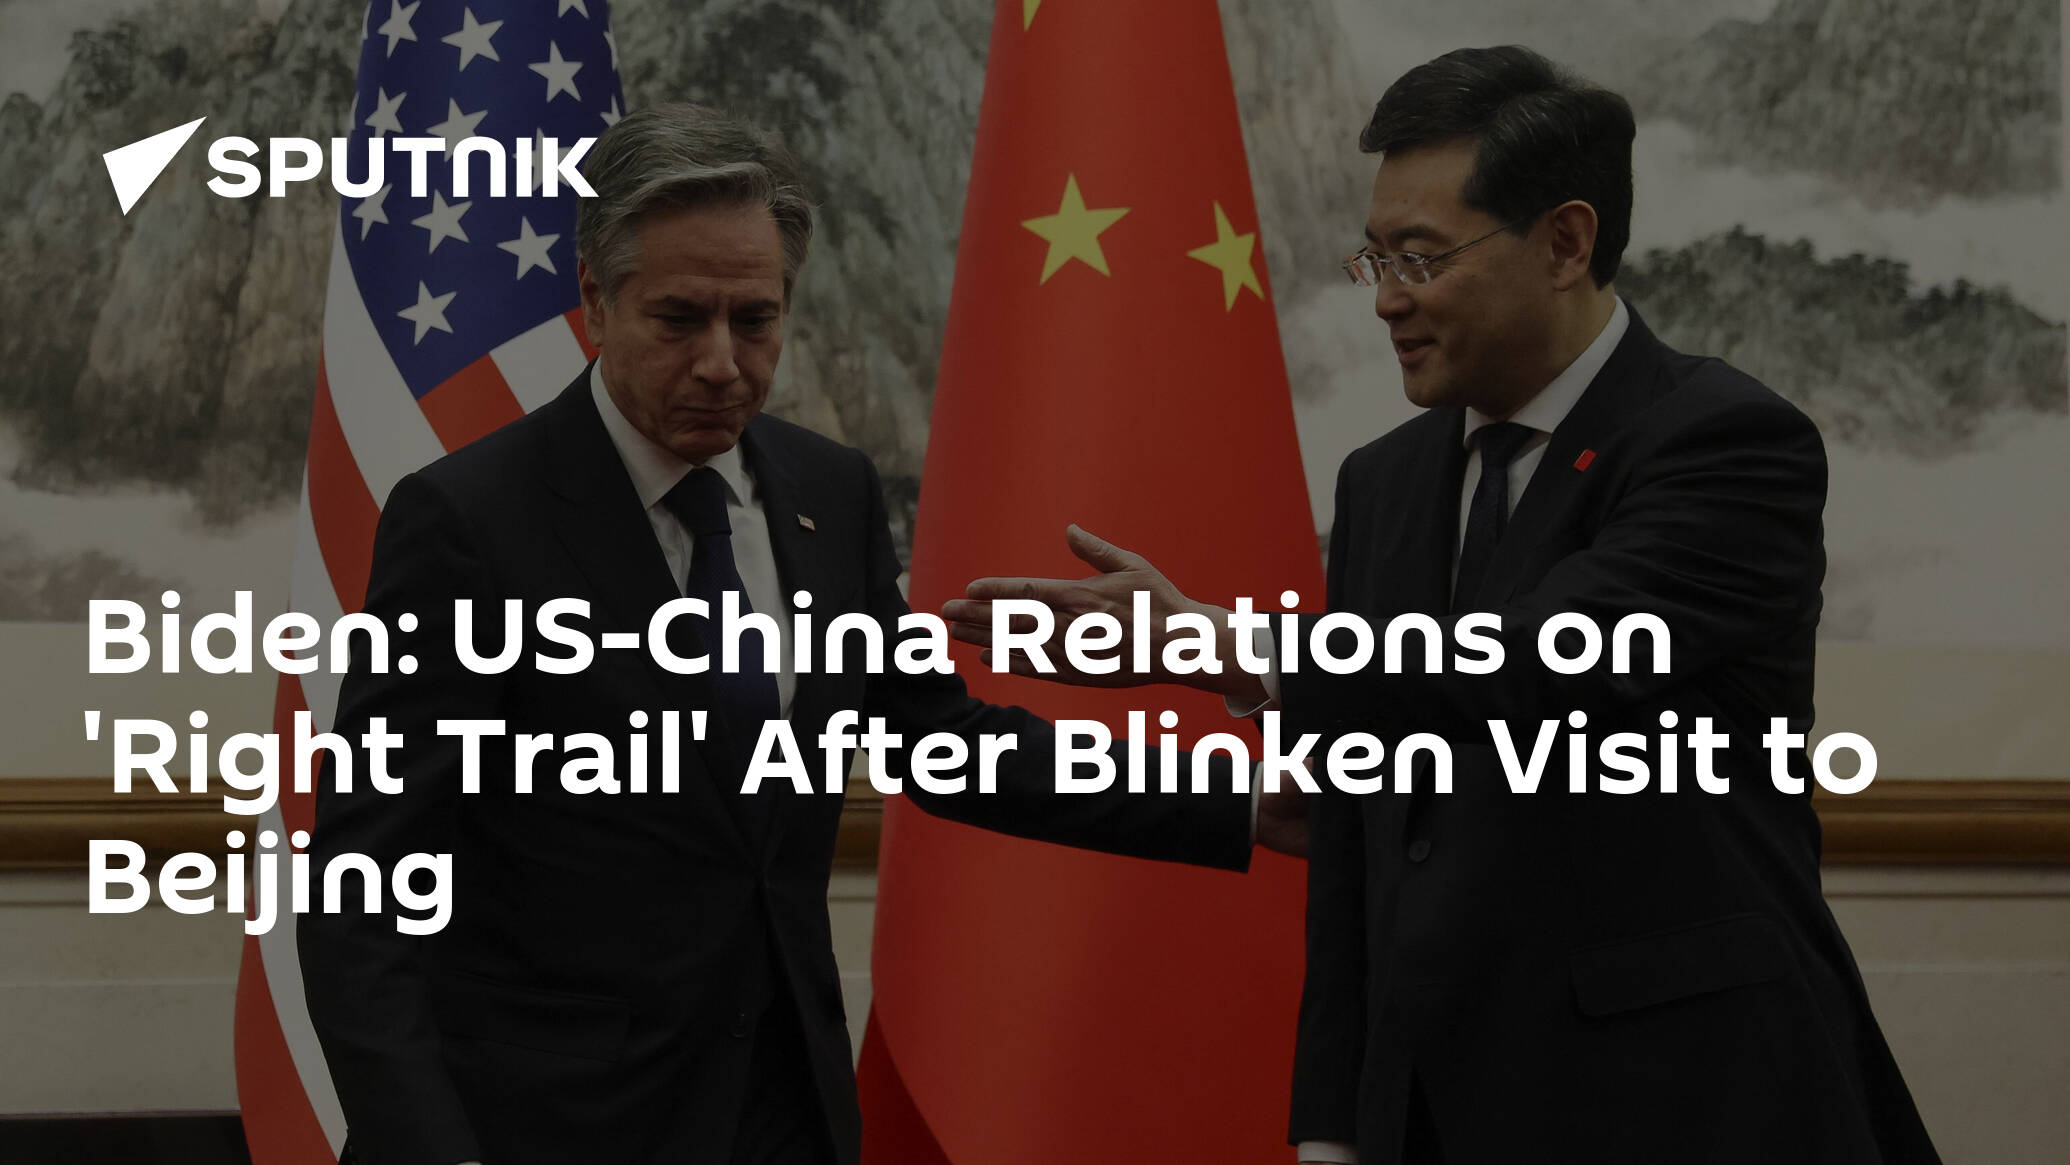 Biden: US-China Relations on 'Right Trail' After Blinken Visit to Beijing